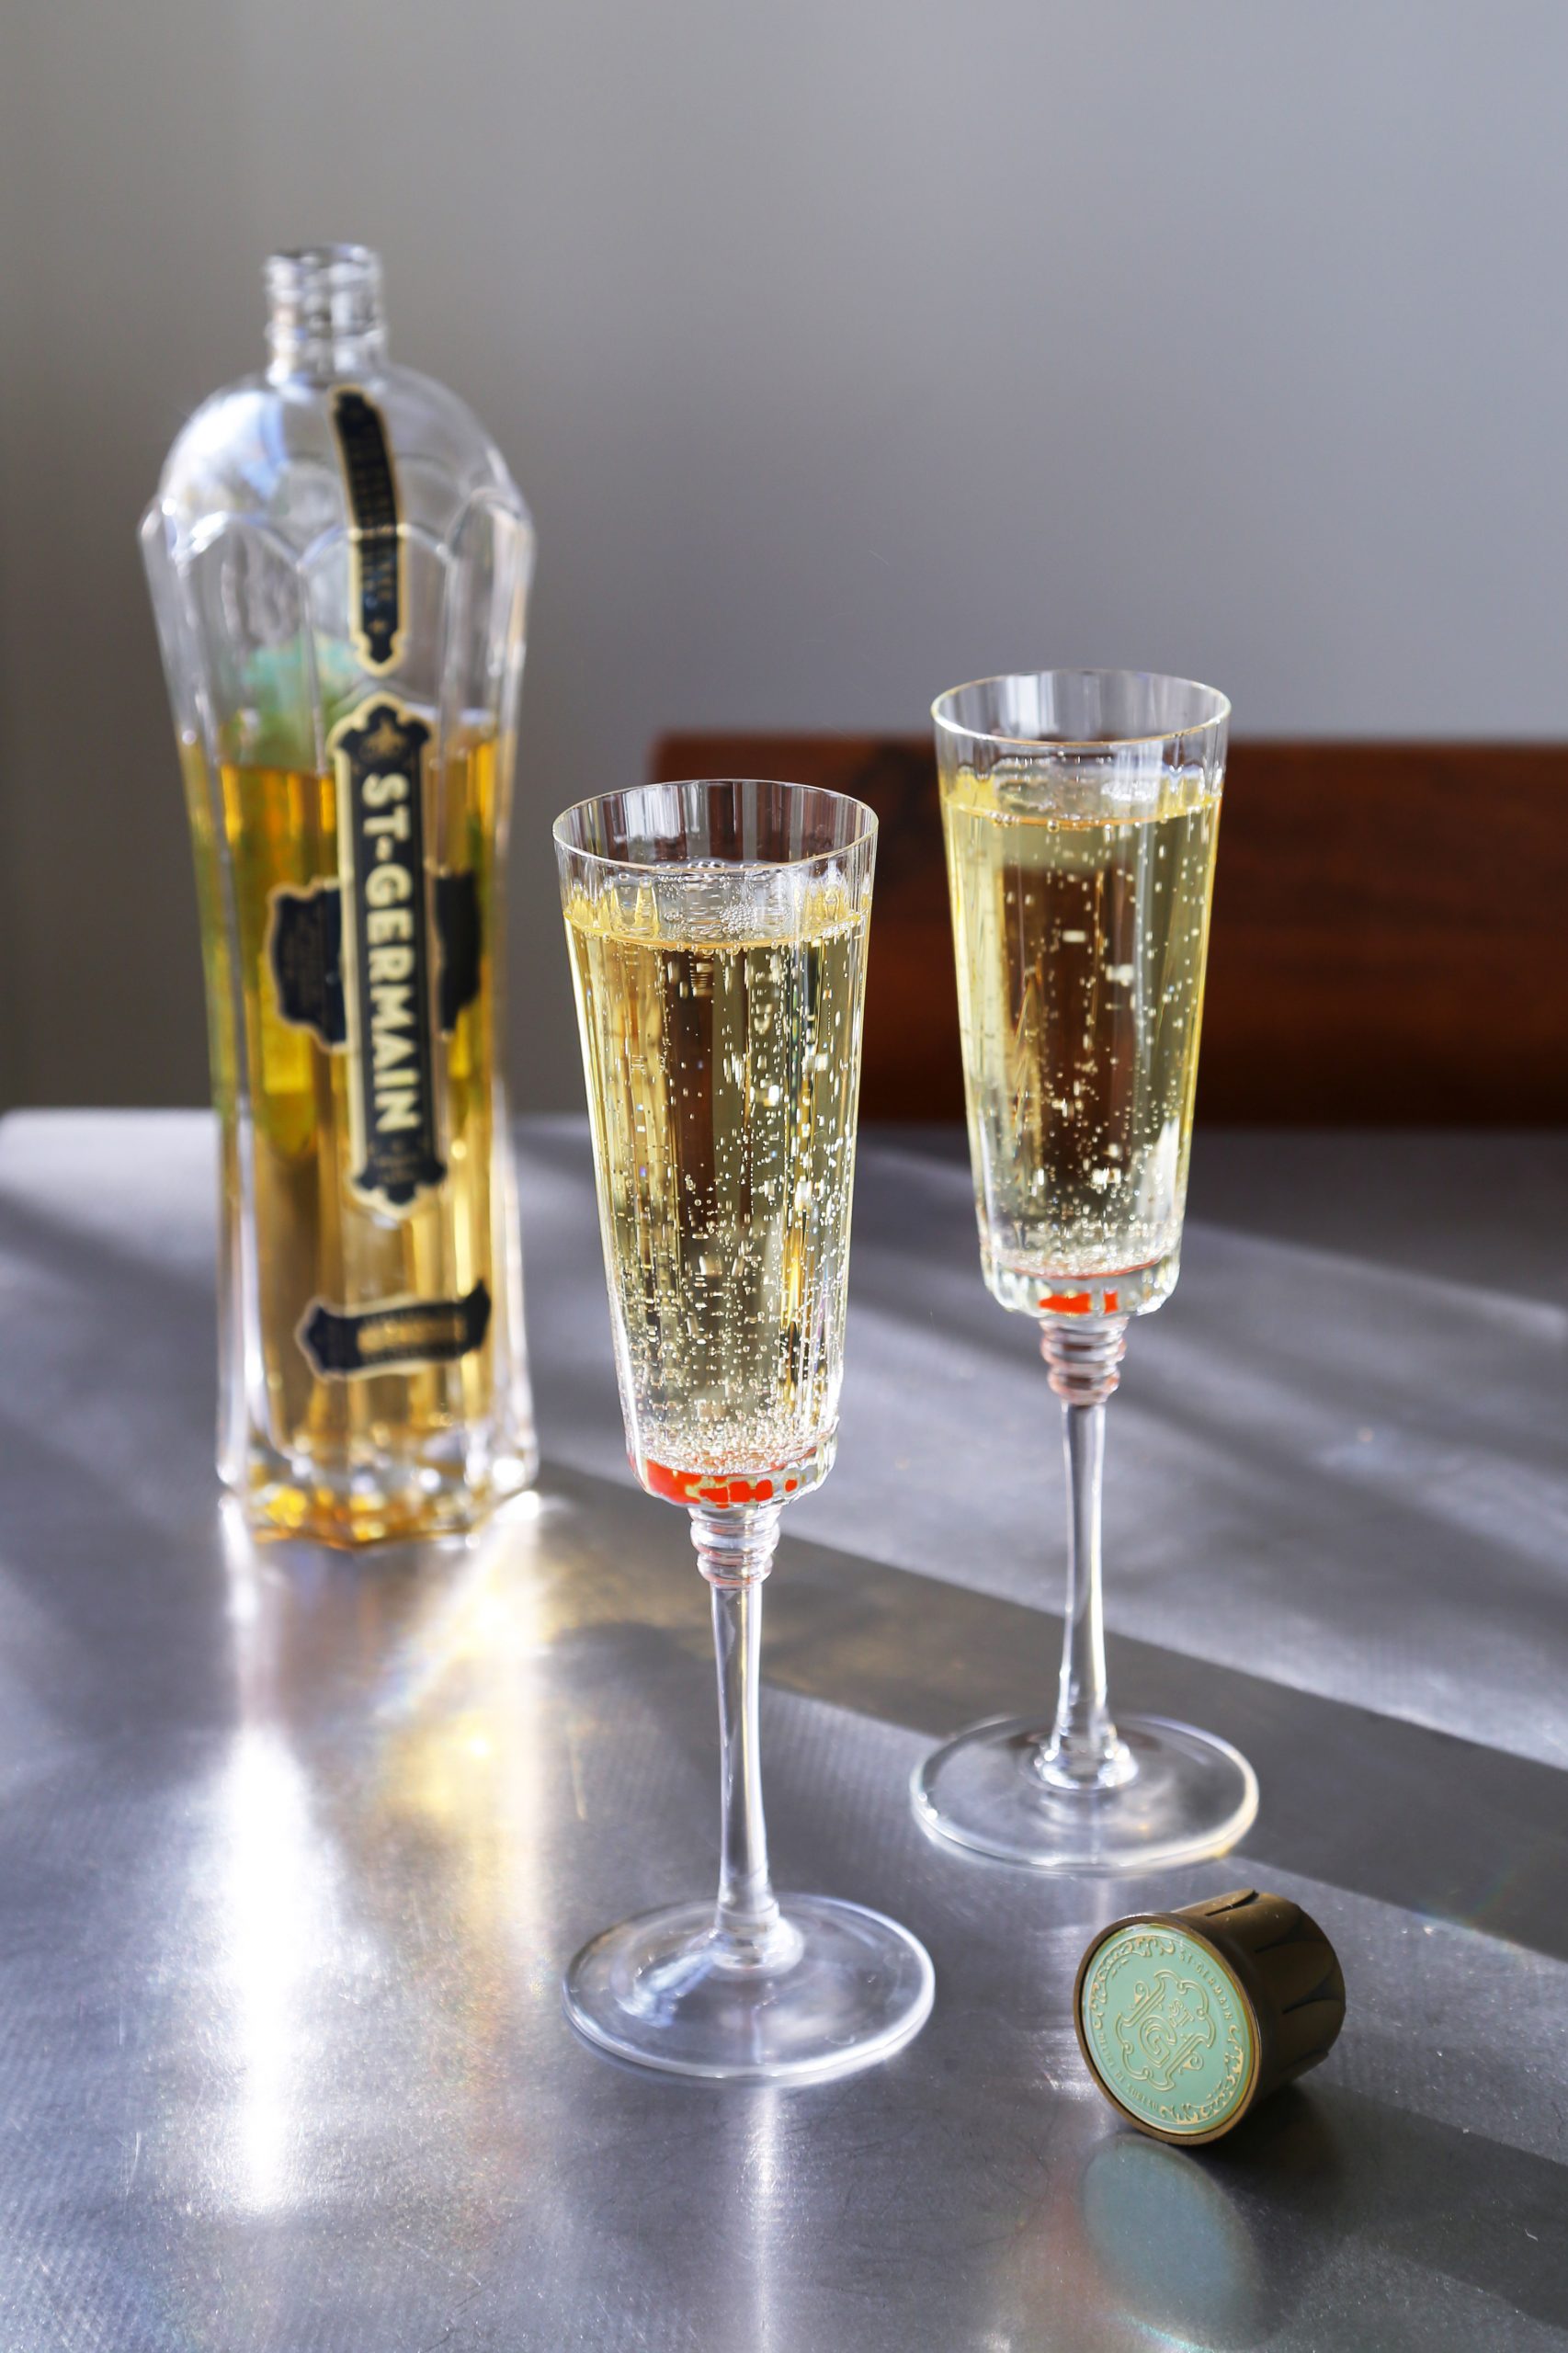 St-Germain and Champagne Recipe